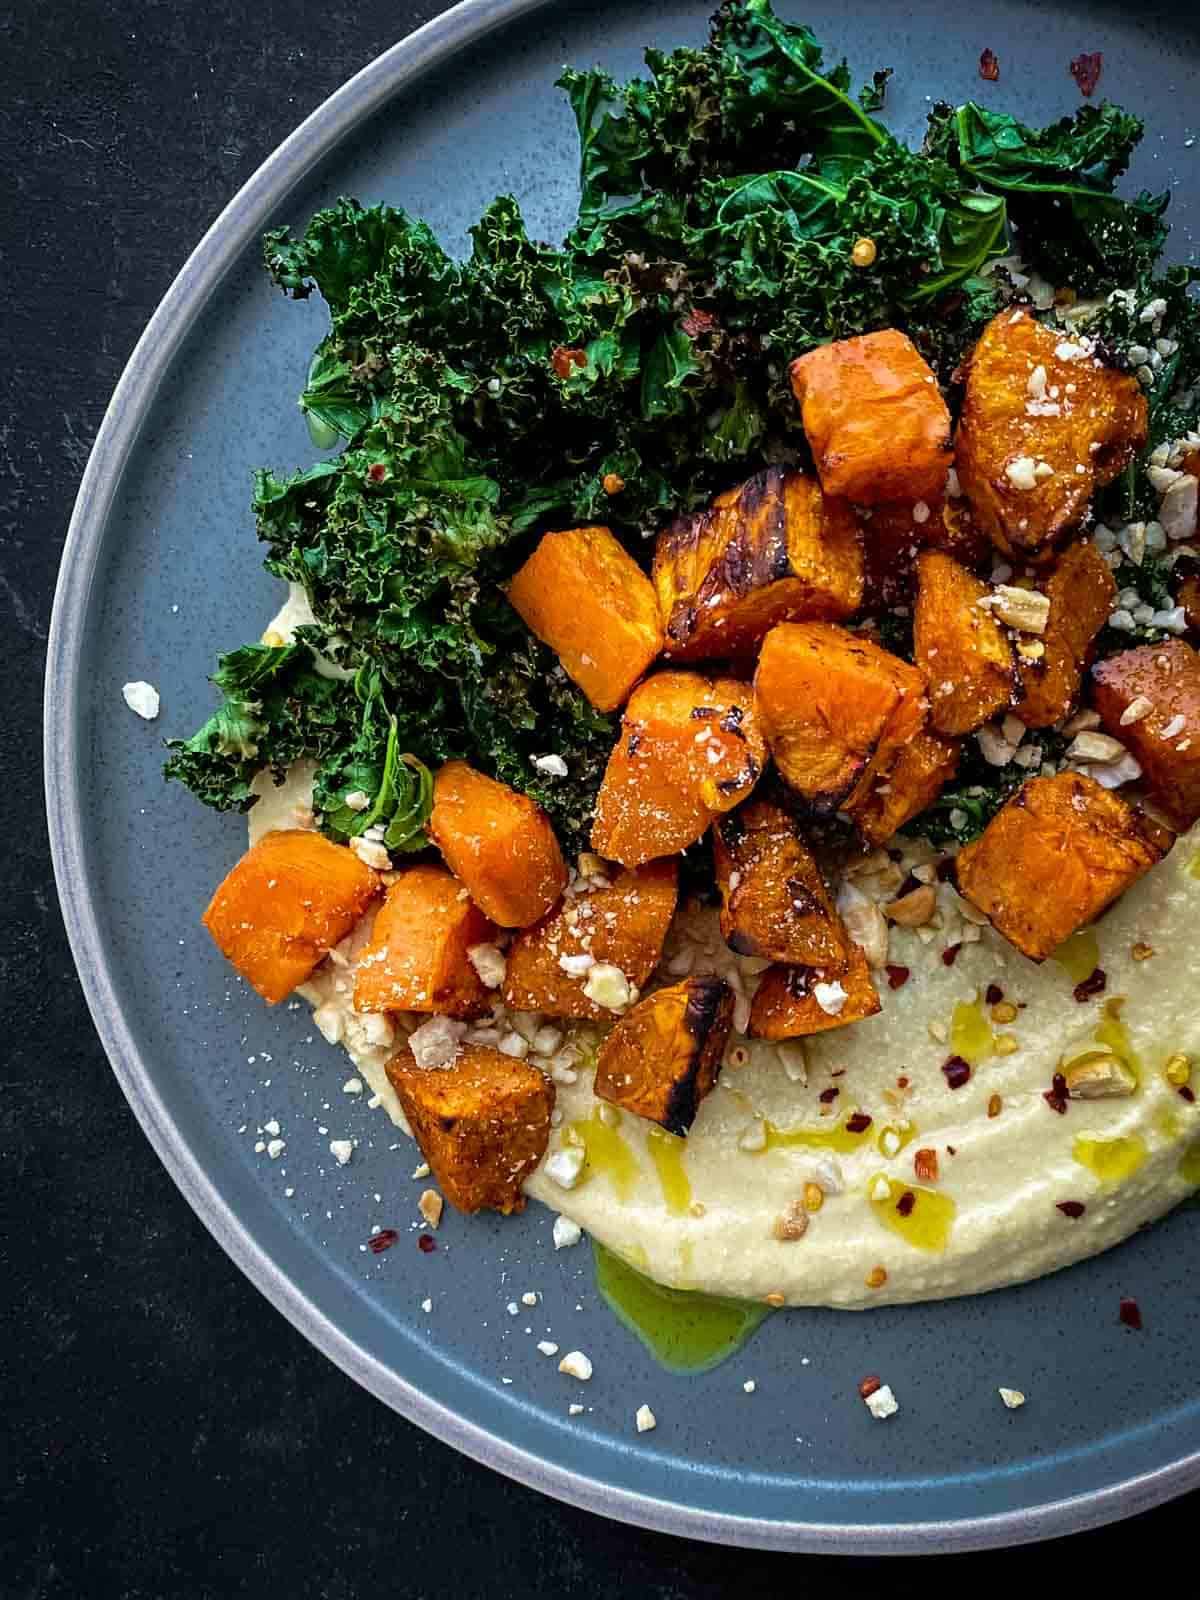 Crispy Kale Salad with Roasted Sweet Potato in a blue bowl